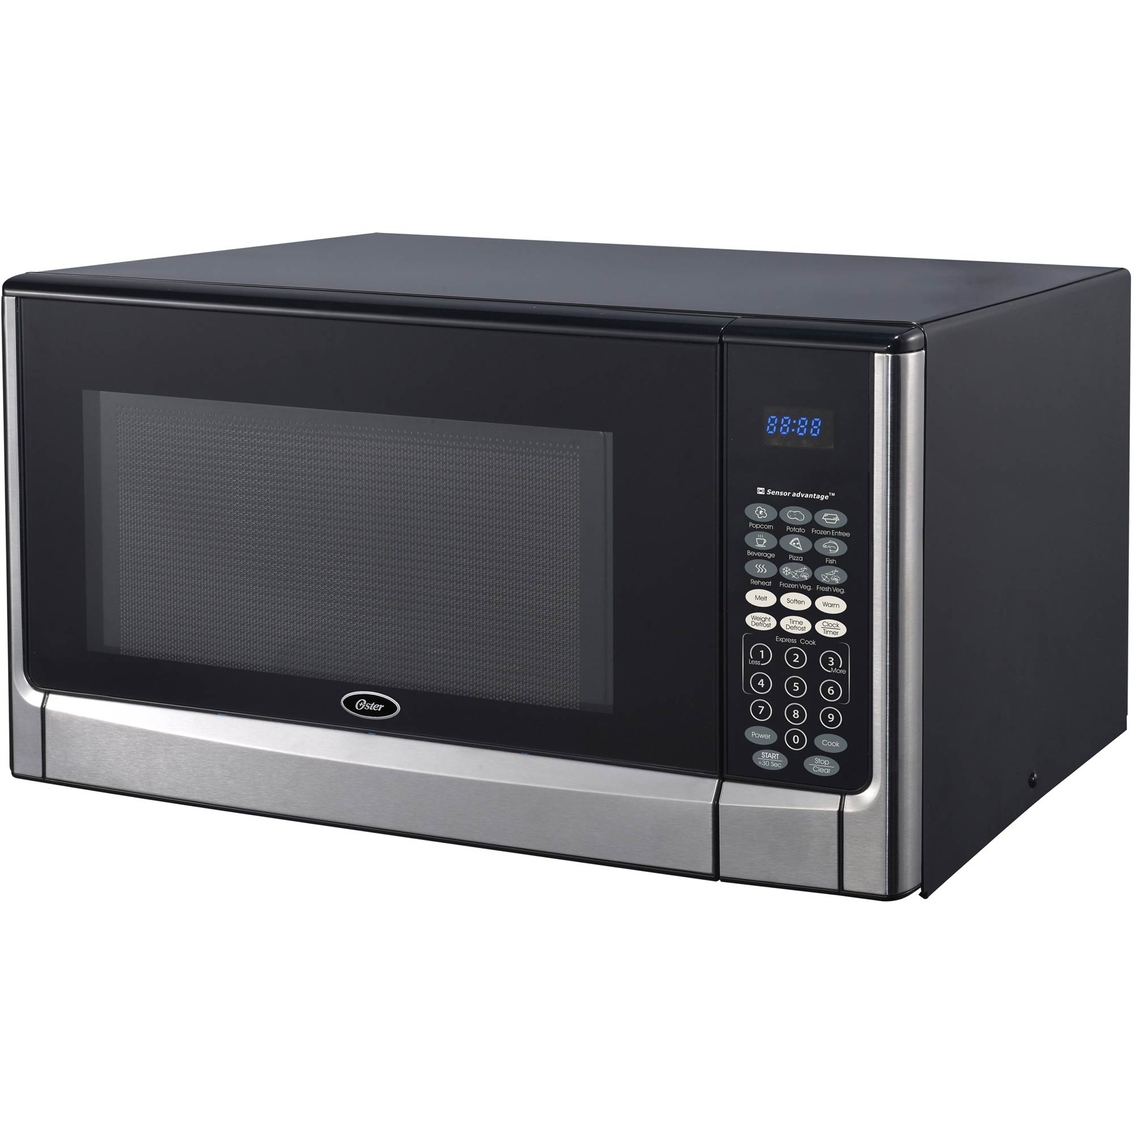 Oster 1 6 Cu Ft Countertop Microwave Oven Appliances